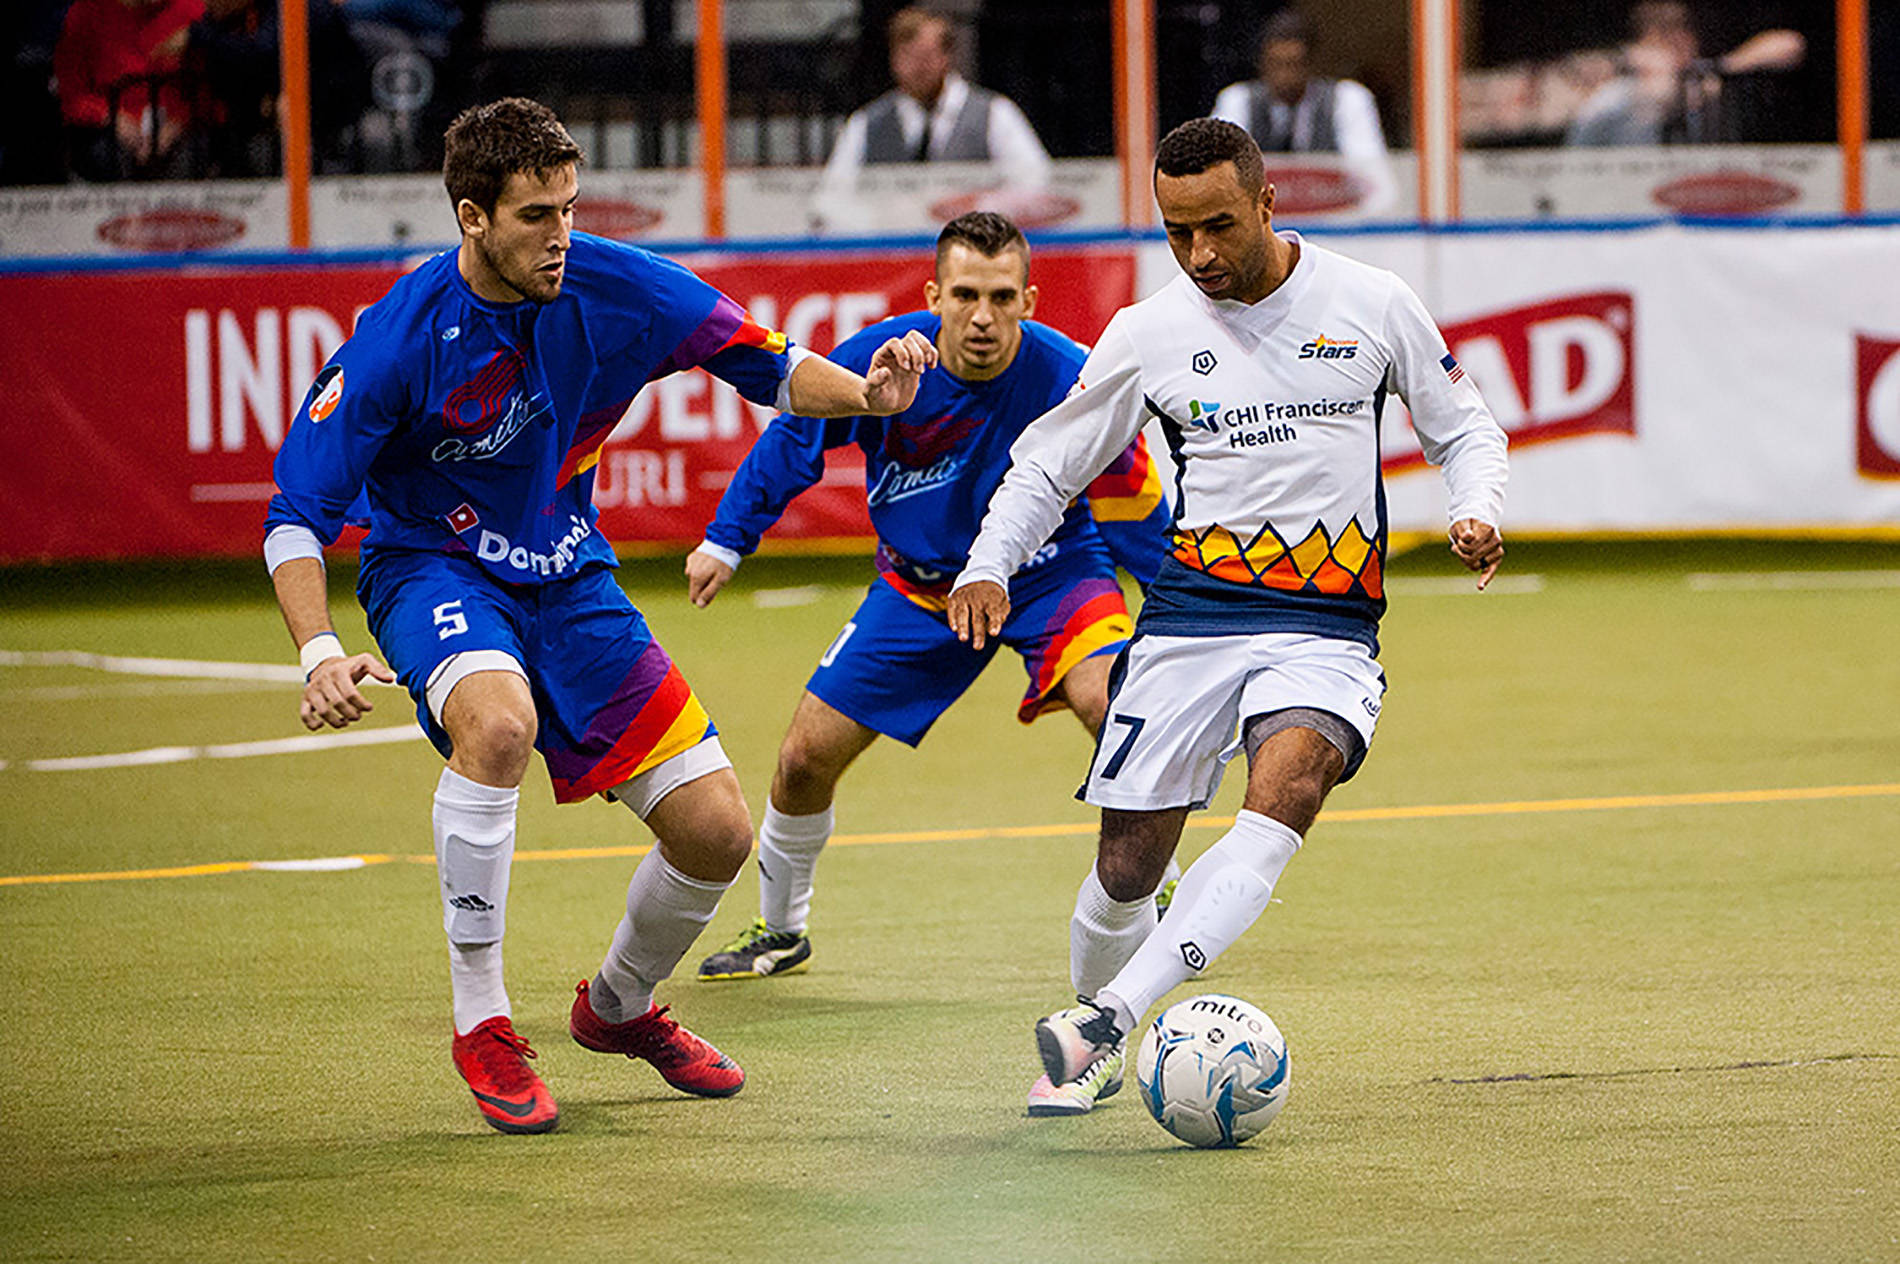 The Stars’ Raphael Cox, right, dribbles the ball with a pair of Comets defenders close by during MASL play. COURTESY PHOTO, Amy Kontras